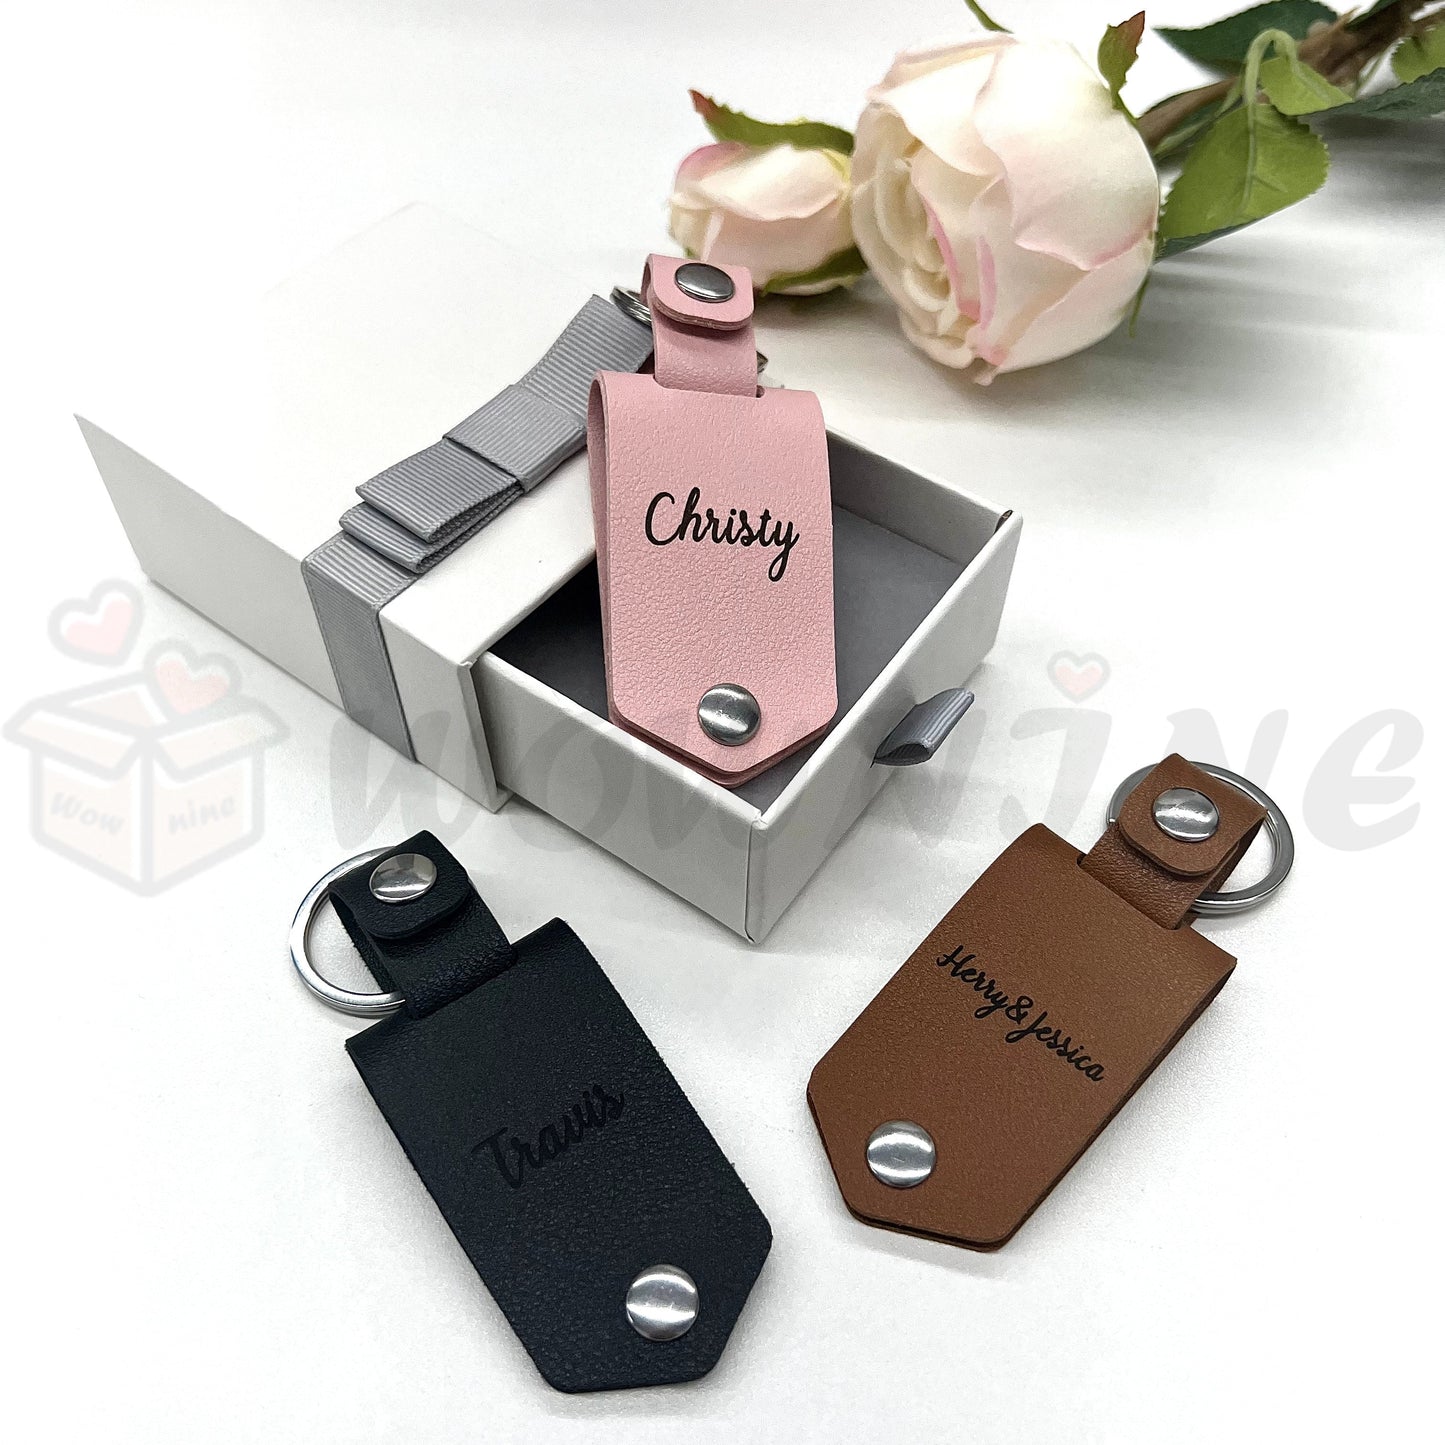 Personalized Photo Keyring In Leather Case